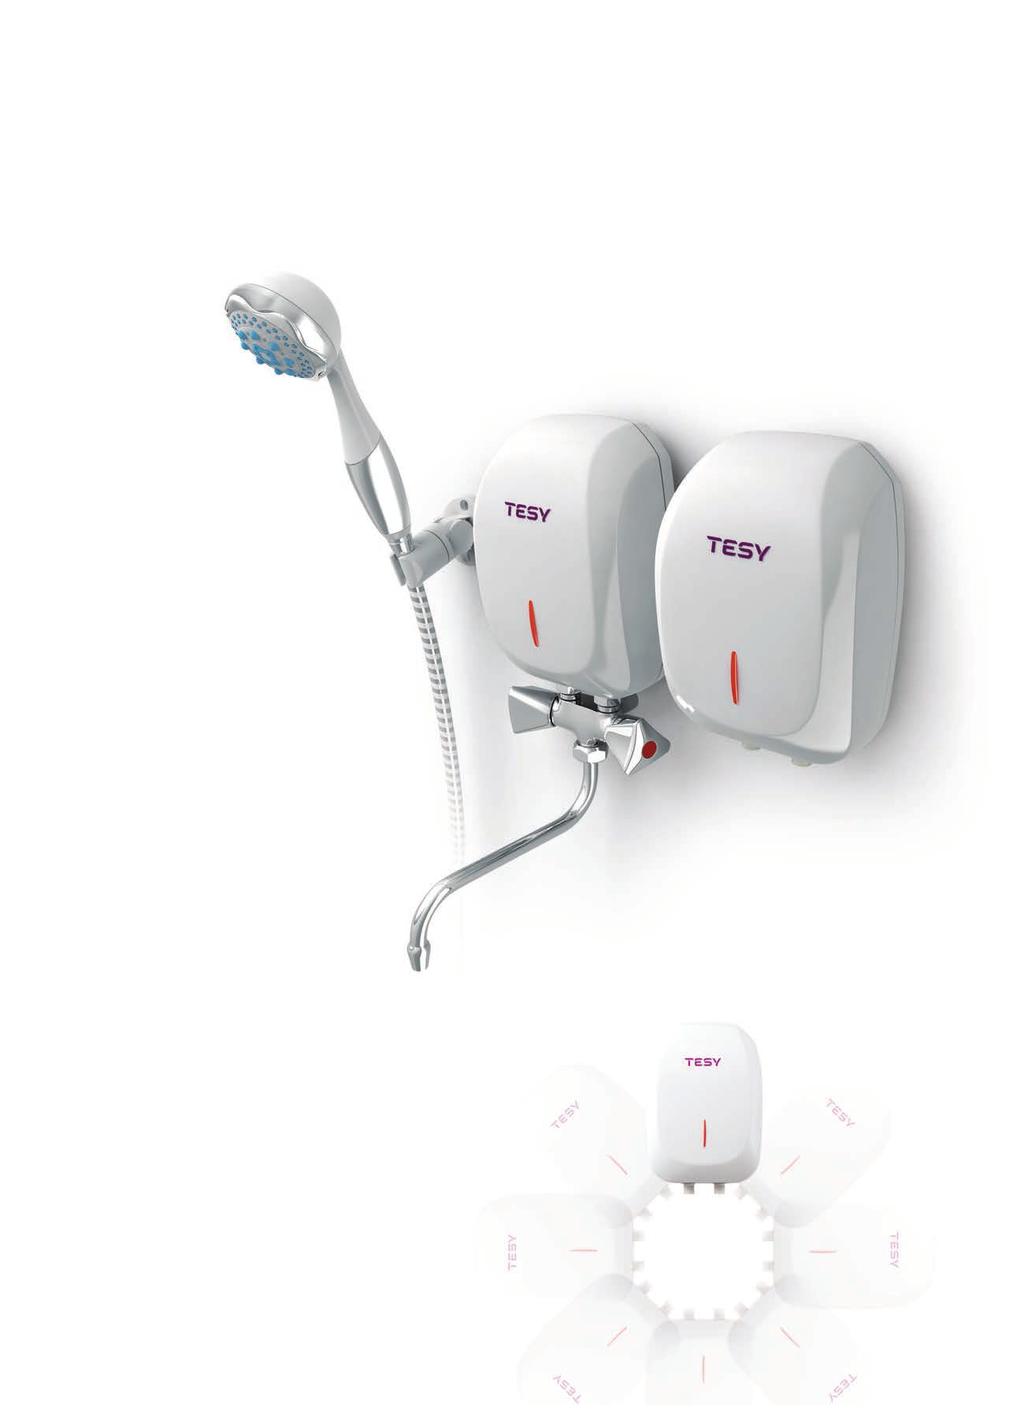 The TESY-branded instantaneous water heaters provide hot water in unlimited amount and feature an integrated technology guaranteeing optimal and constant temperature of the water.